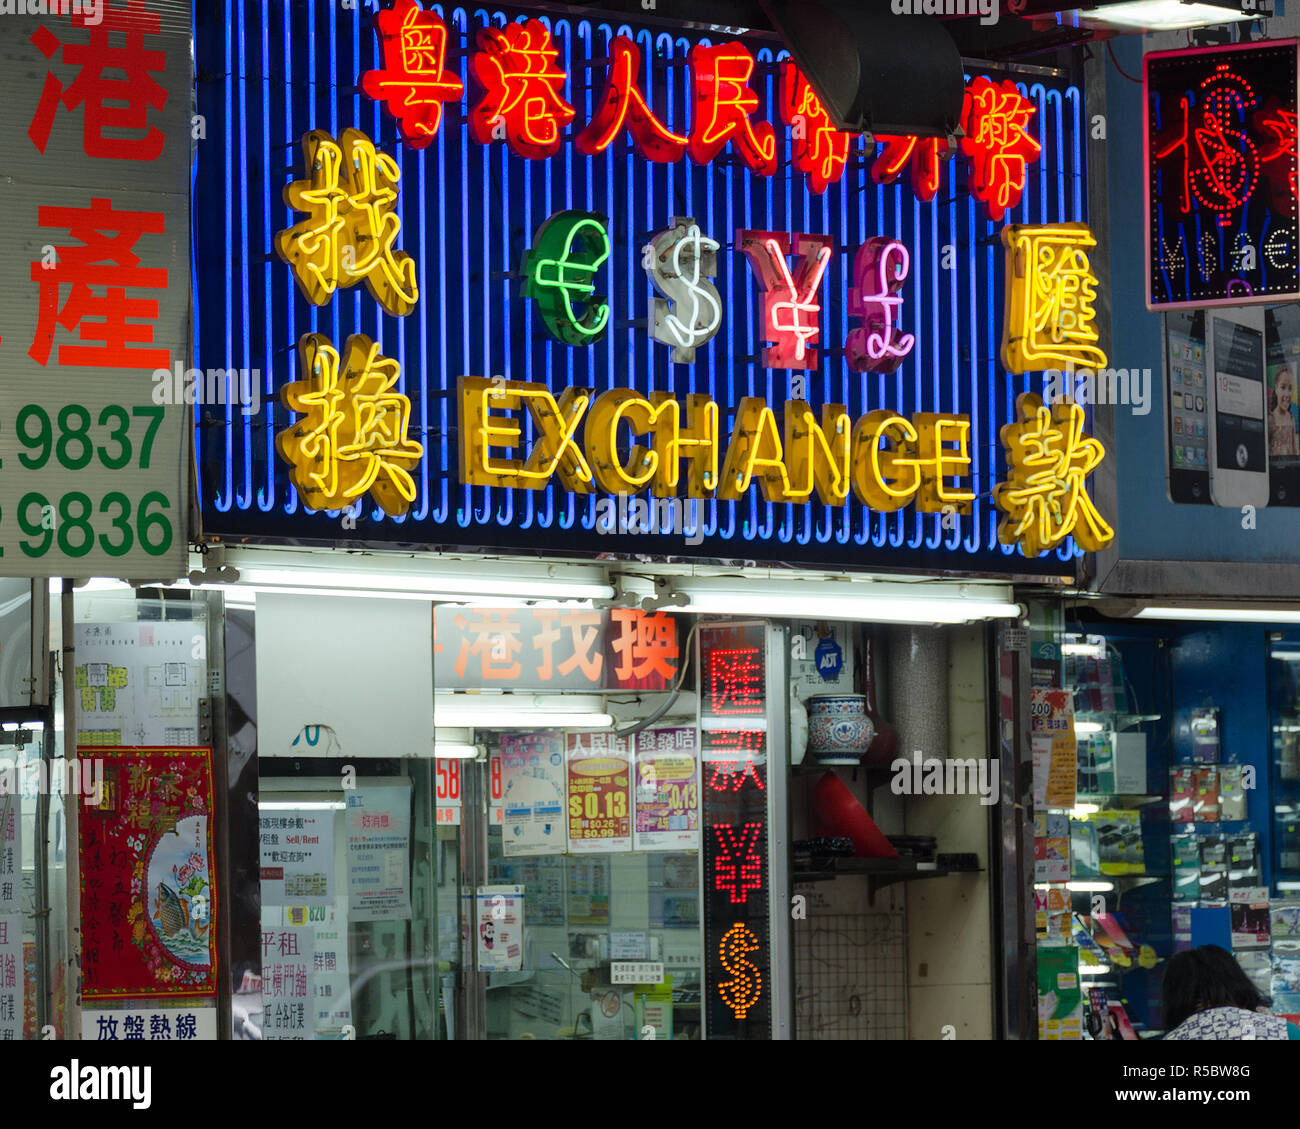 Hong Kong, 2018-03-06: Sign exchange, inscription in Chinese, neon lighting at night. Stock Photo